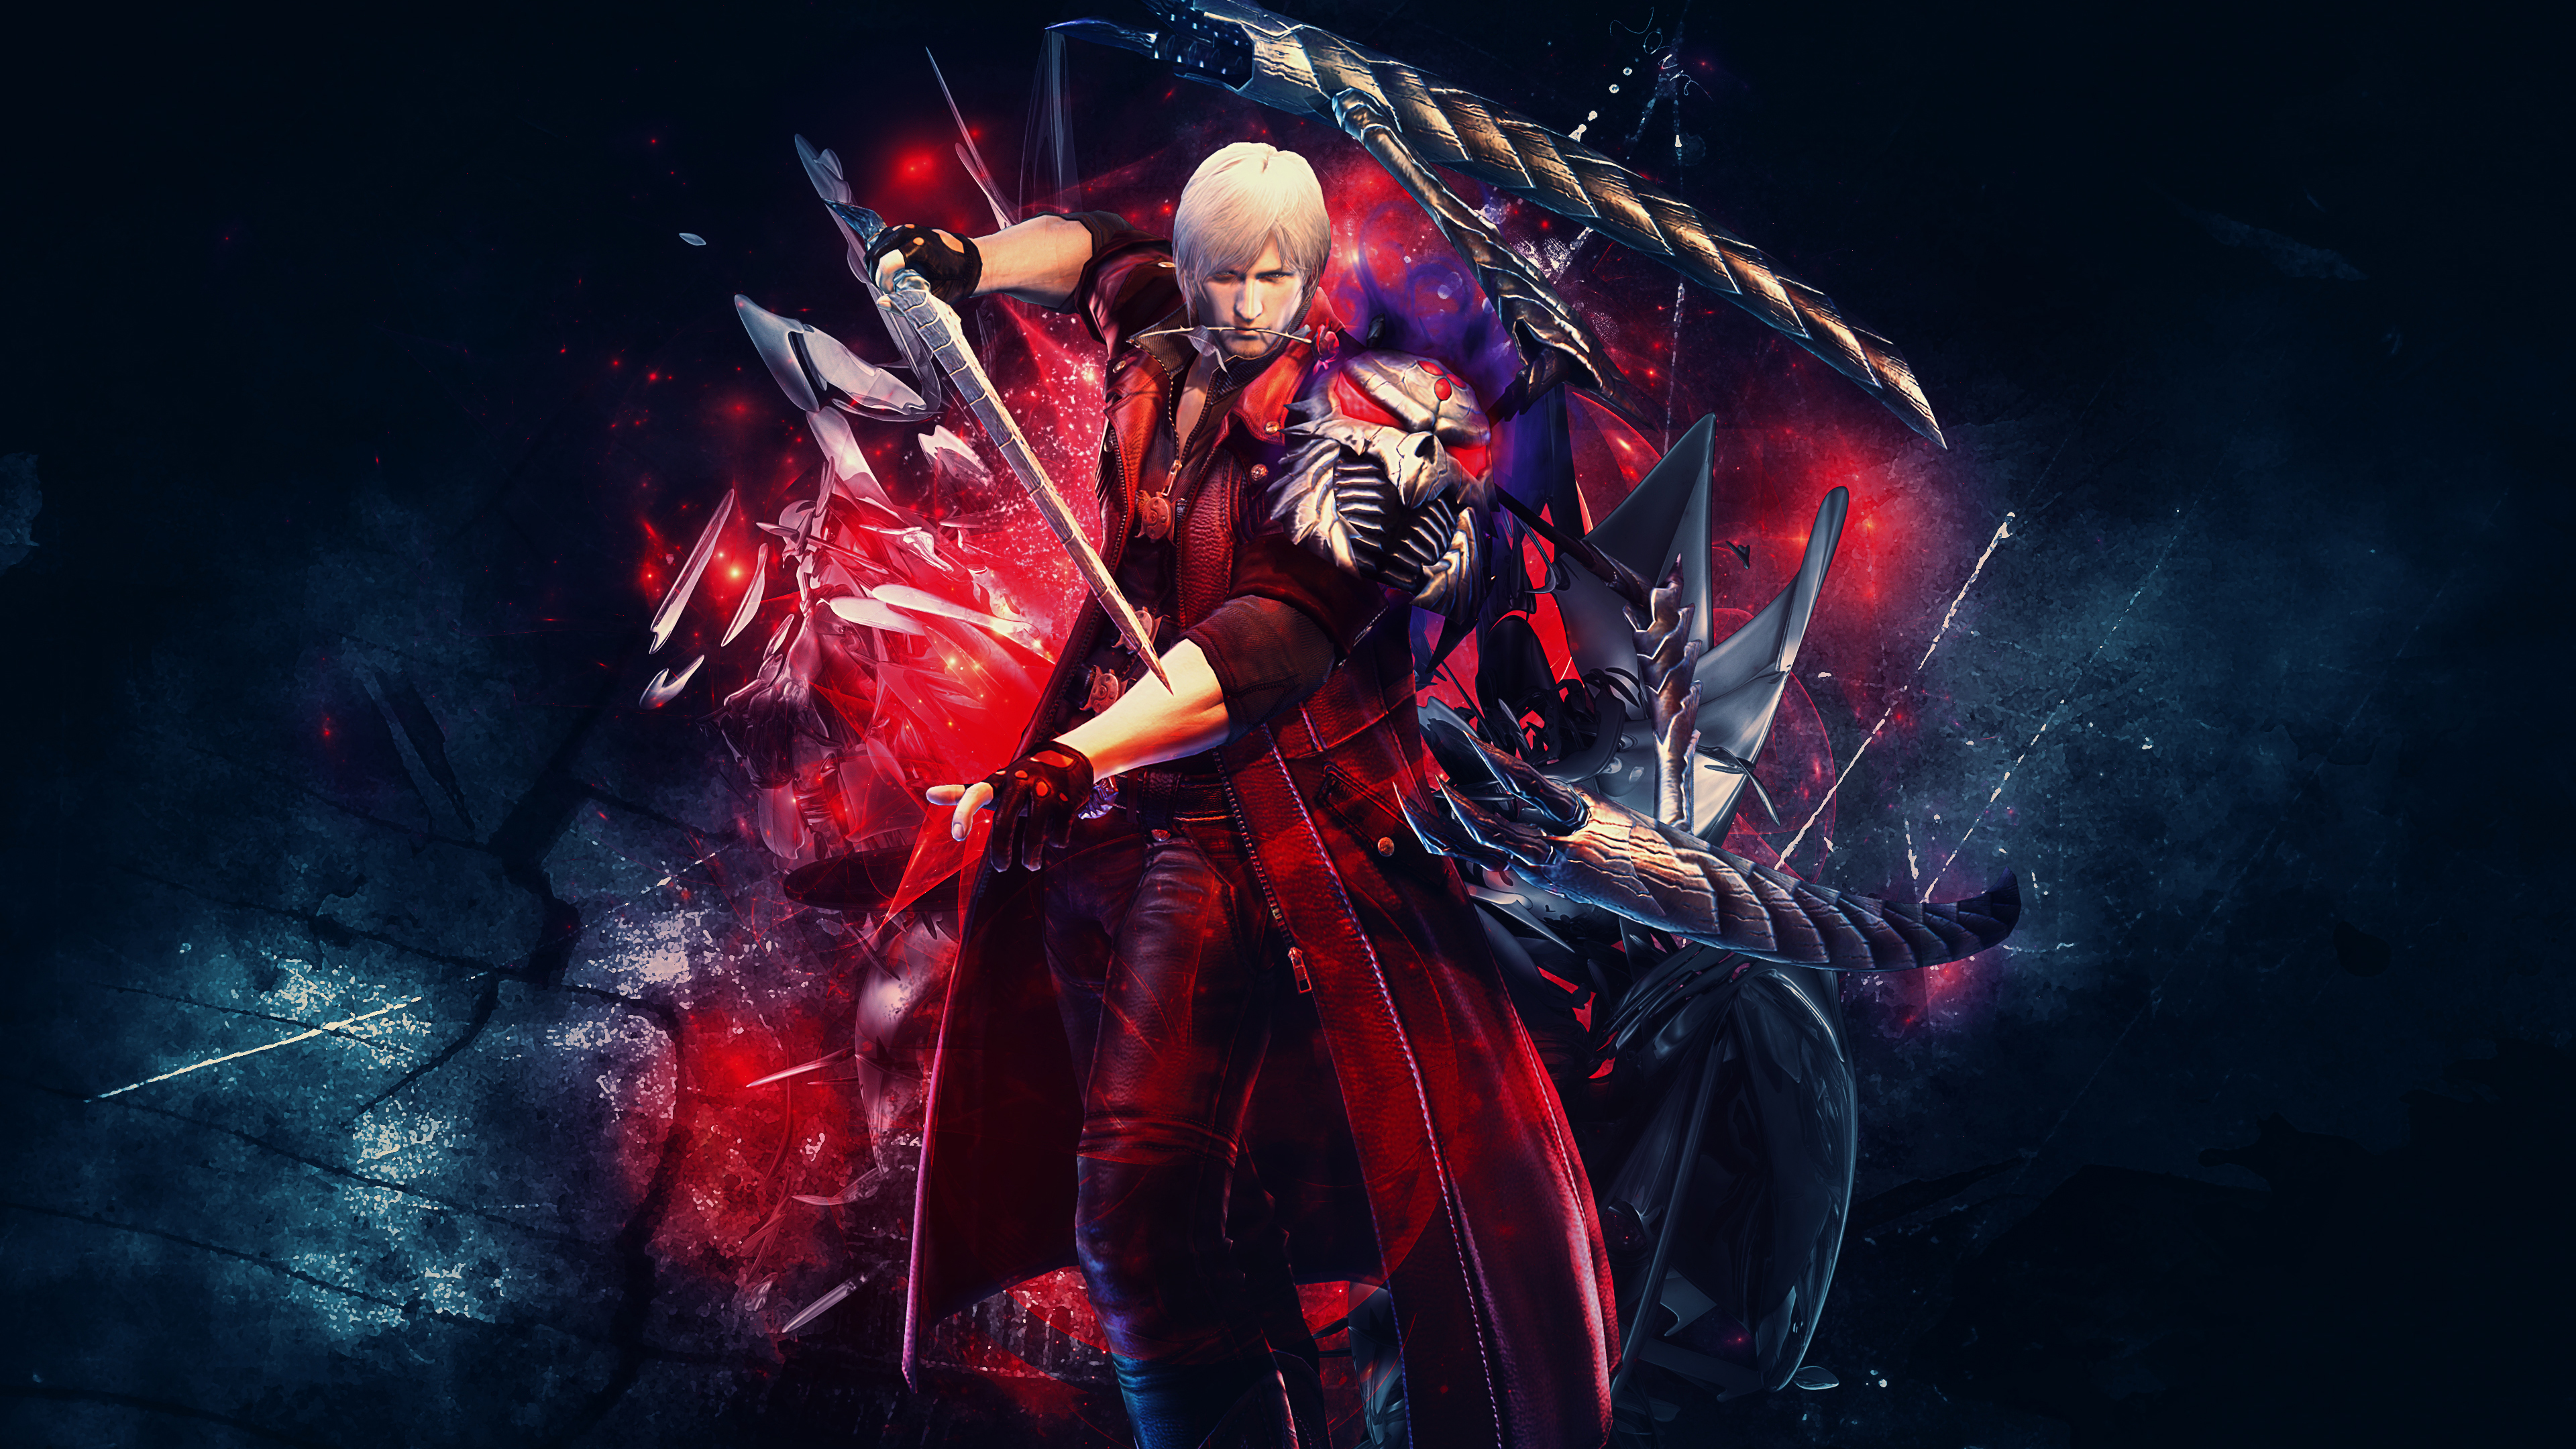 Devil May Cry 4 Wallpapers, Pictures, Images